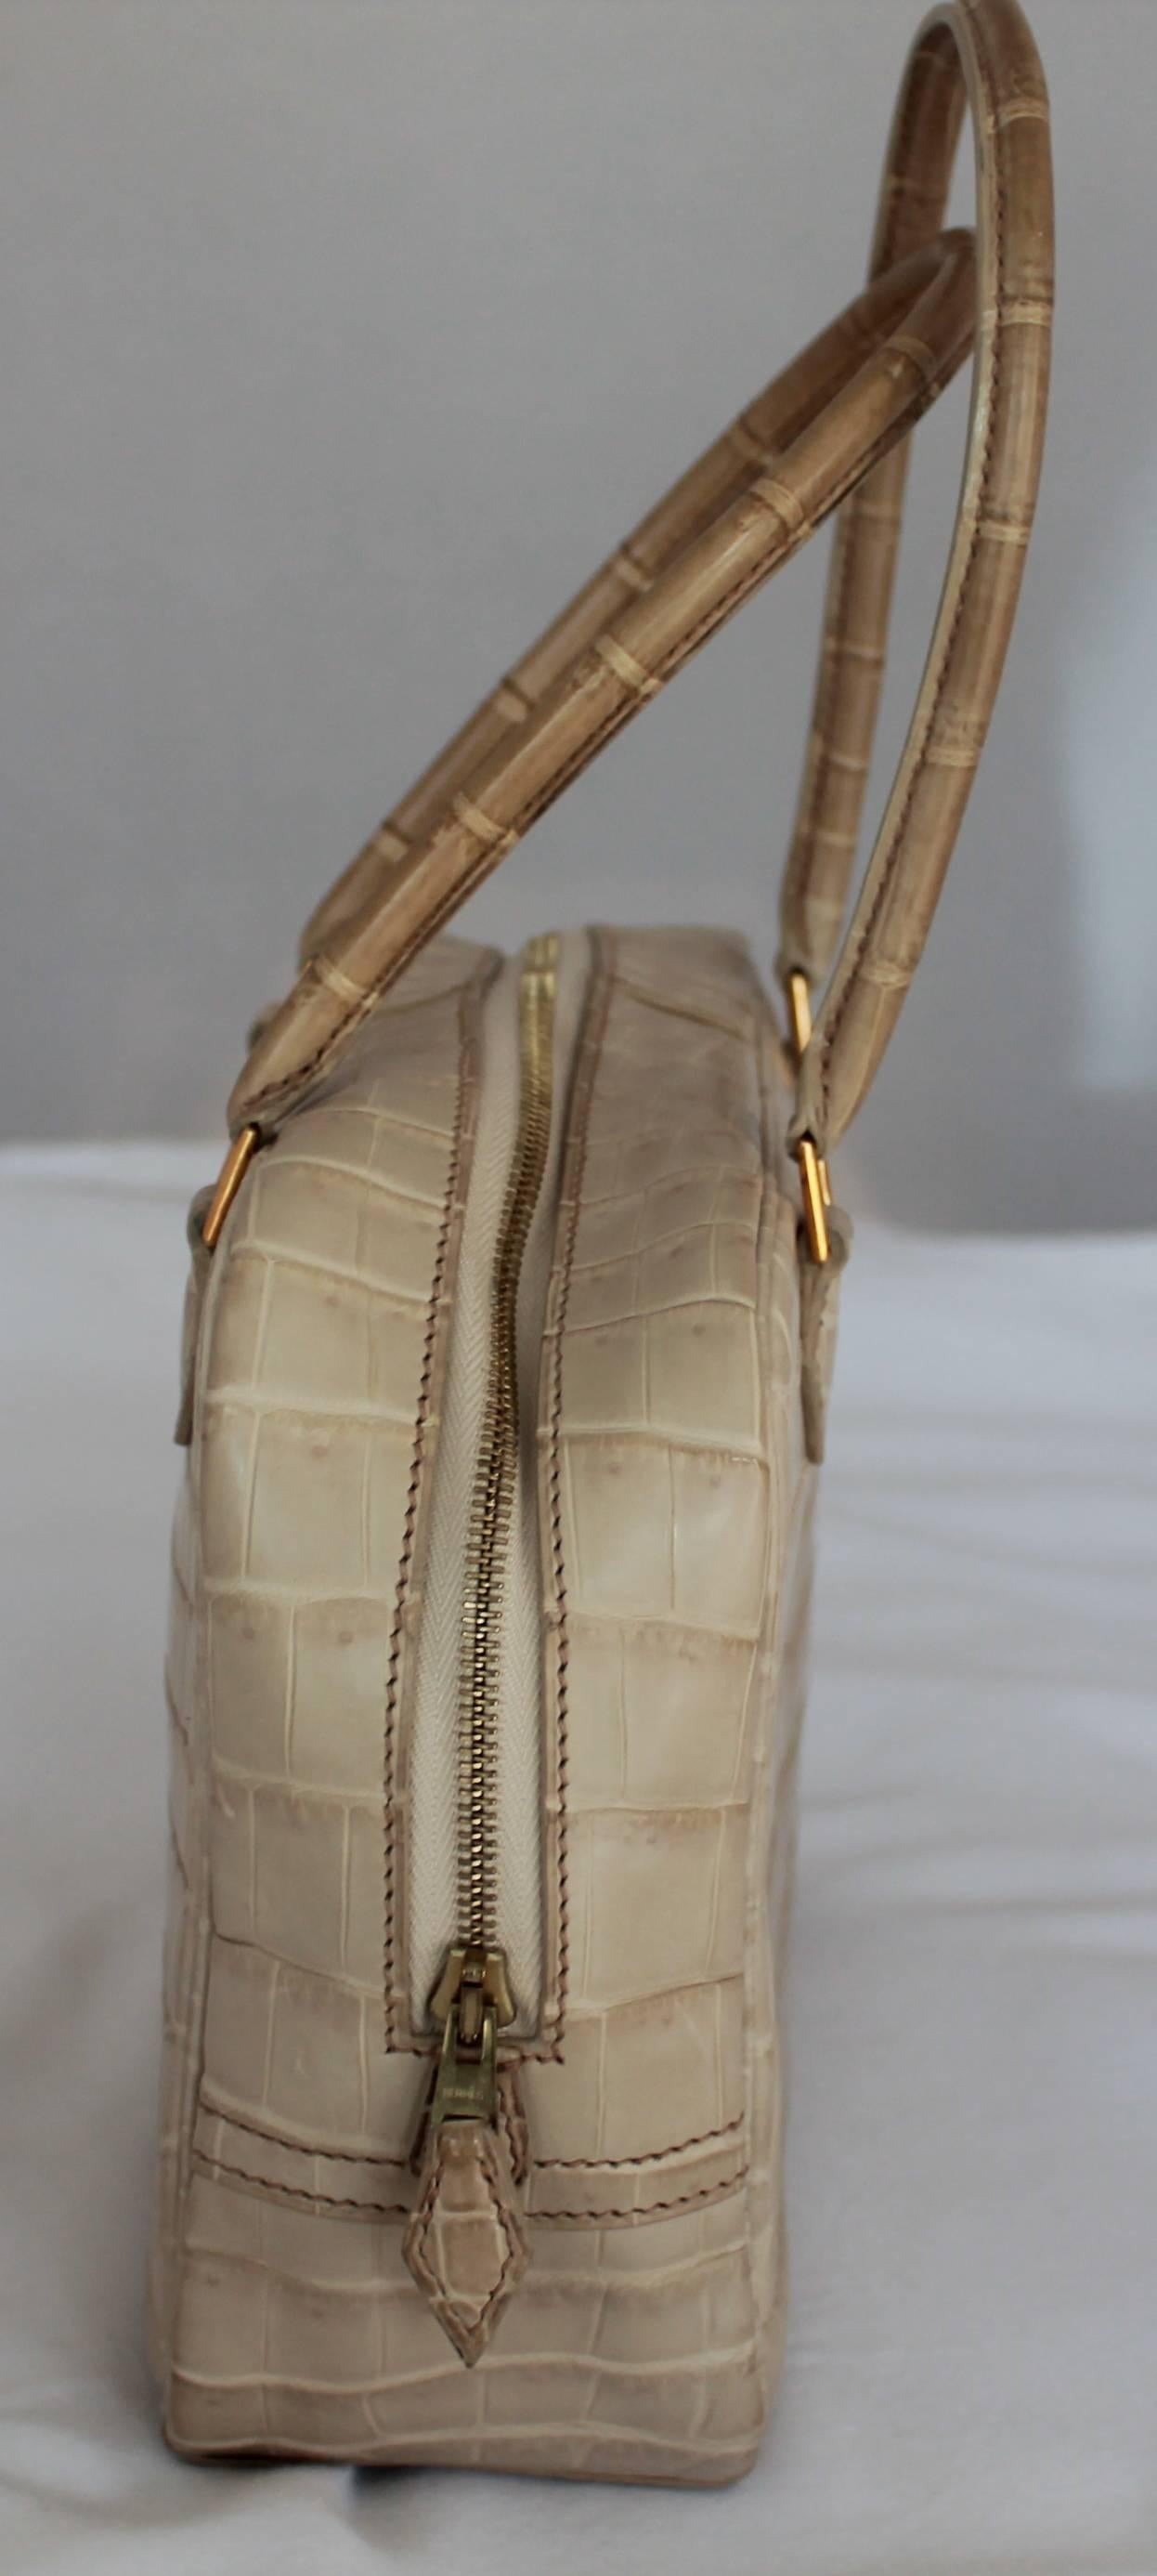 Hermes Beige Crocodile 20cm Plume Handbag - GHW - 2003  This handbag has gold feet and gold hardware. Both handles have slight discoloration due to wear. Comes with Duster. 
Measurements:
Width: 20 cm
Height: 15.25 cm
Depth: 8.25 cm
Handle